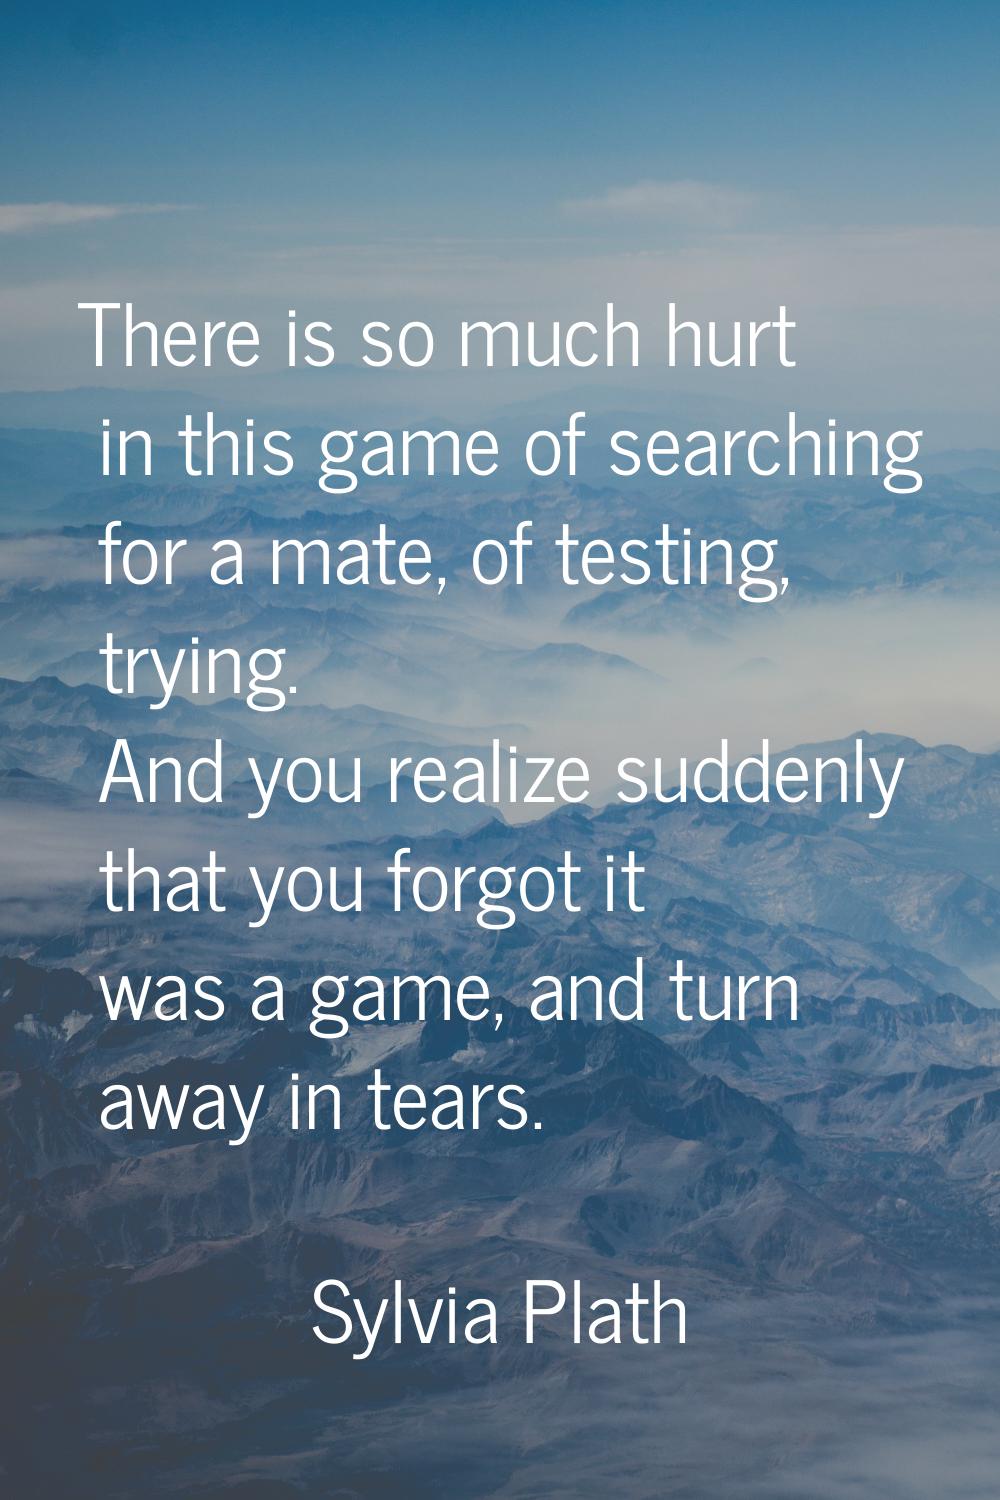 There is so much hurt in this game of searching for a mate, of testing, trying. And you realize sud